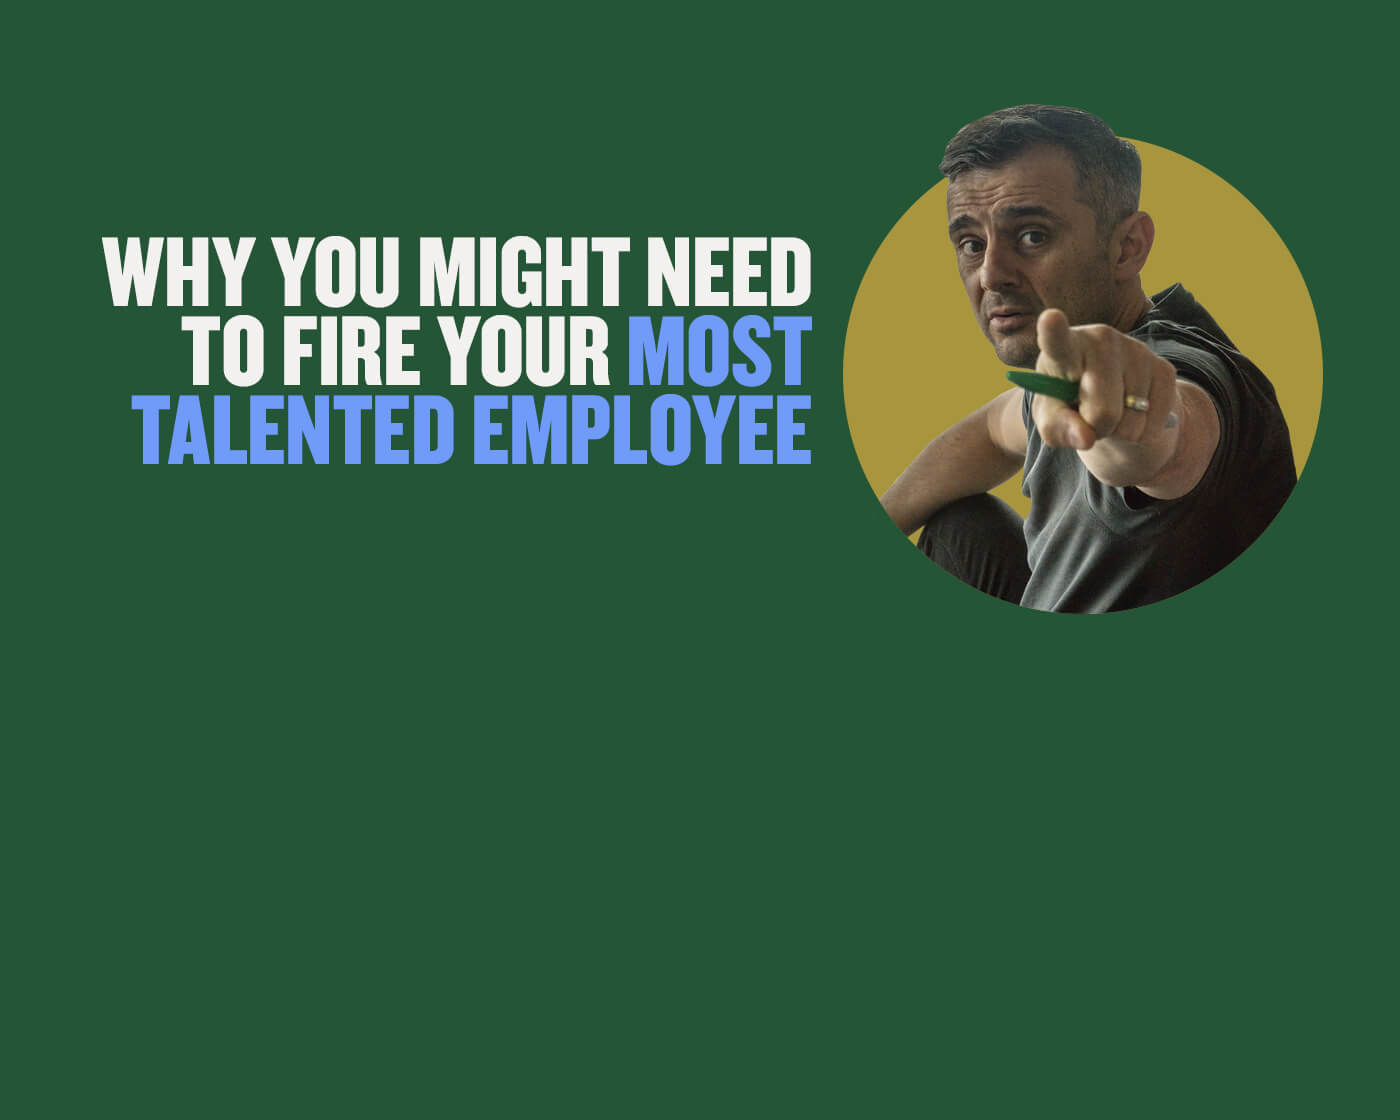 Why You Might Need to Fire Your Most Talented Employee